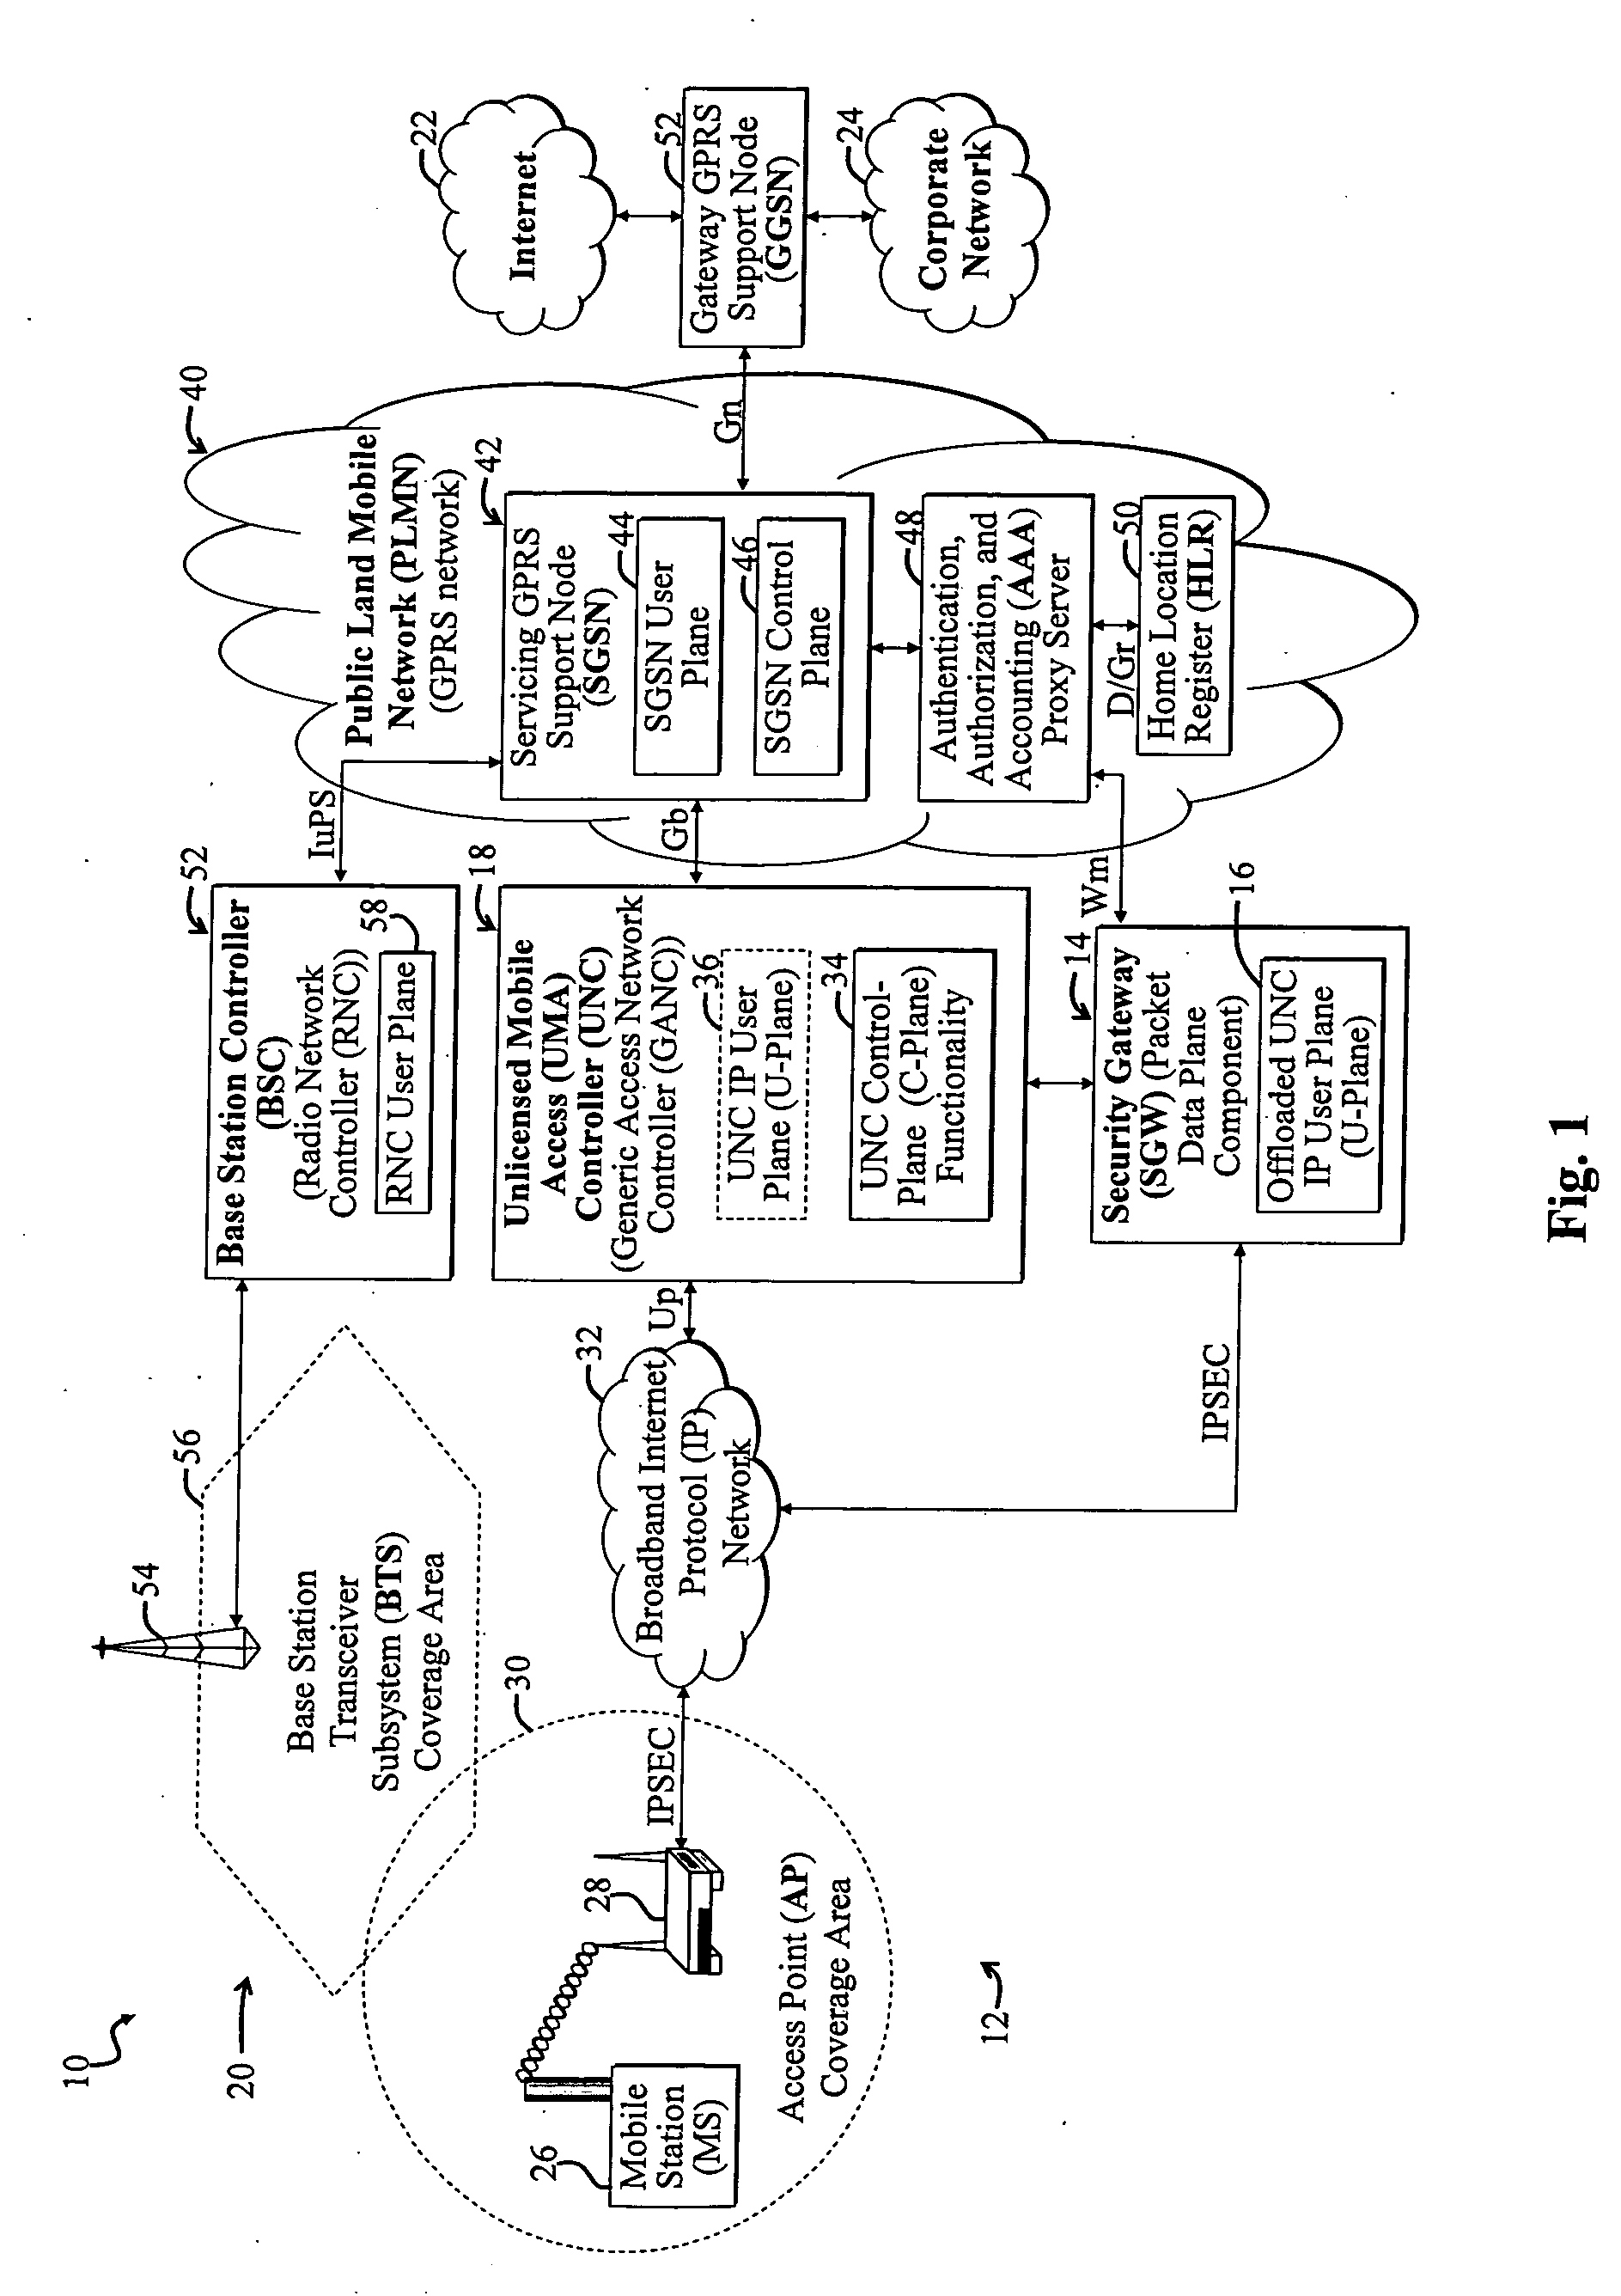 Enhanced unlicensed mobile access network architecture